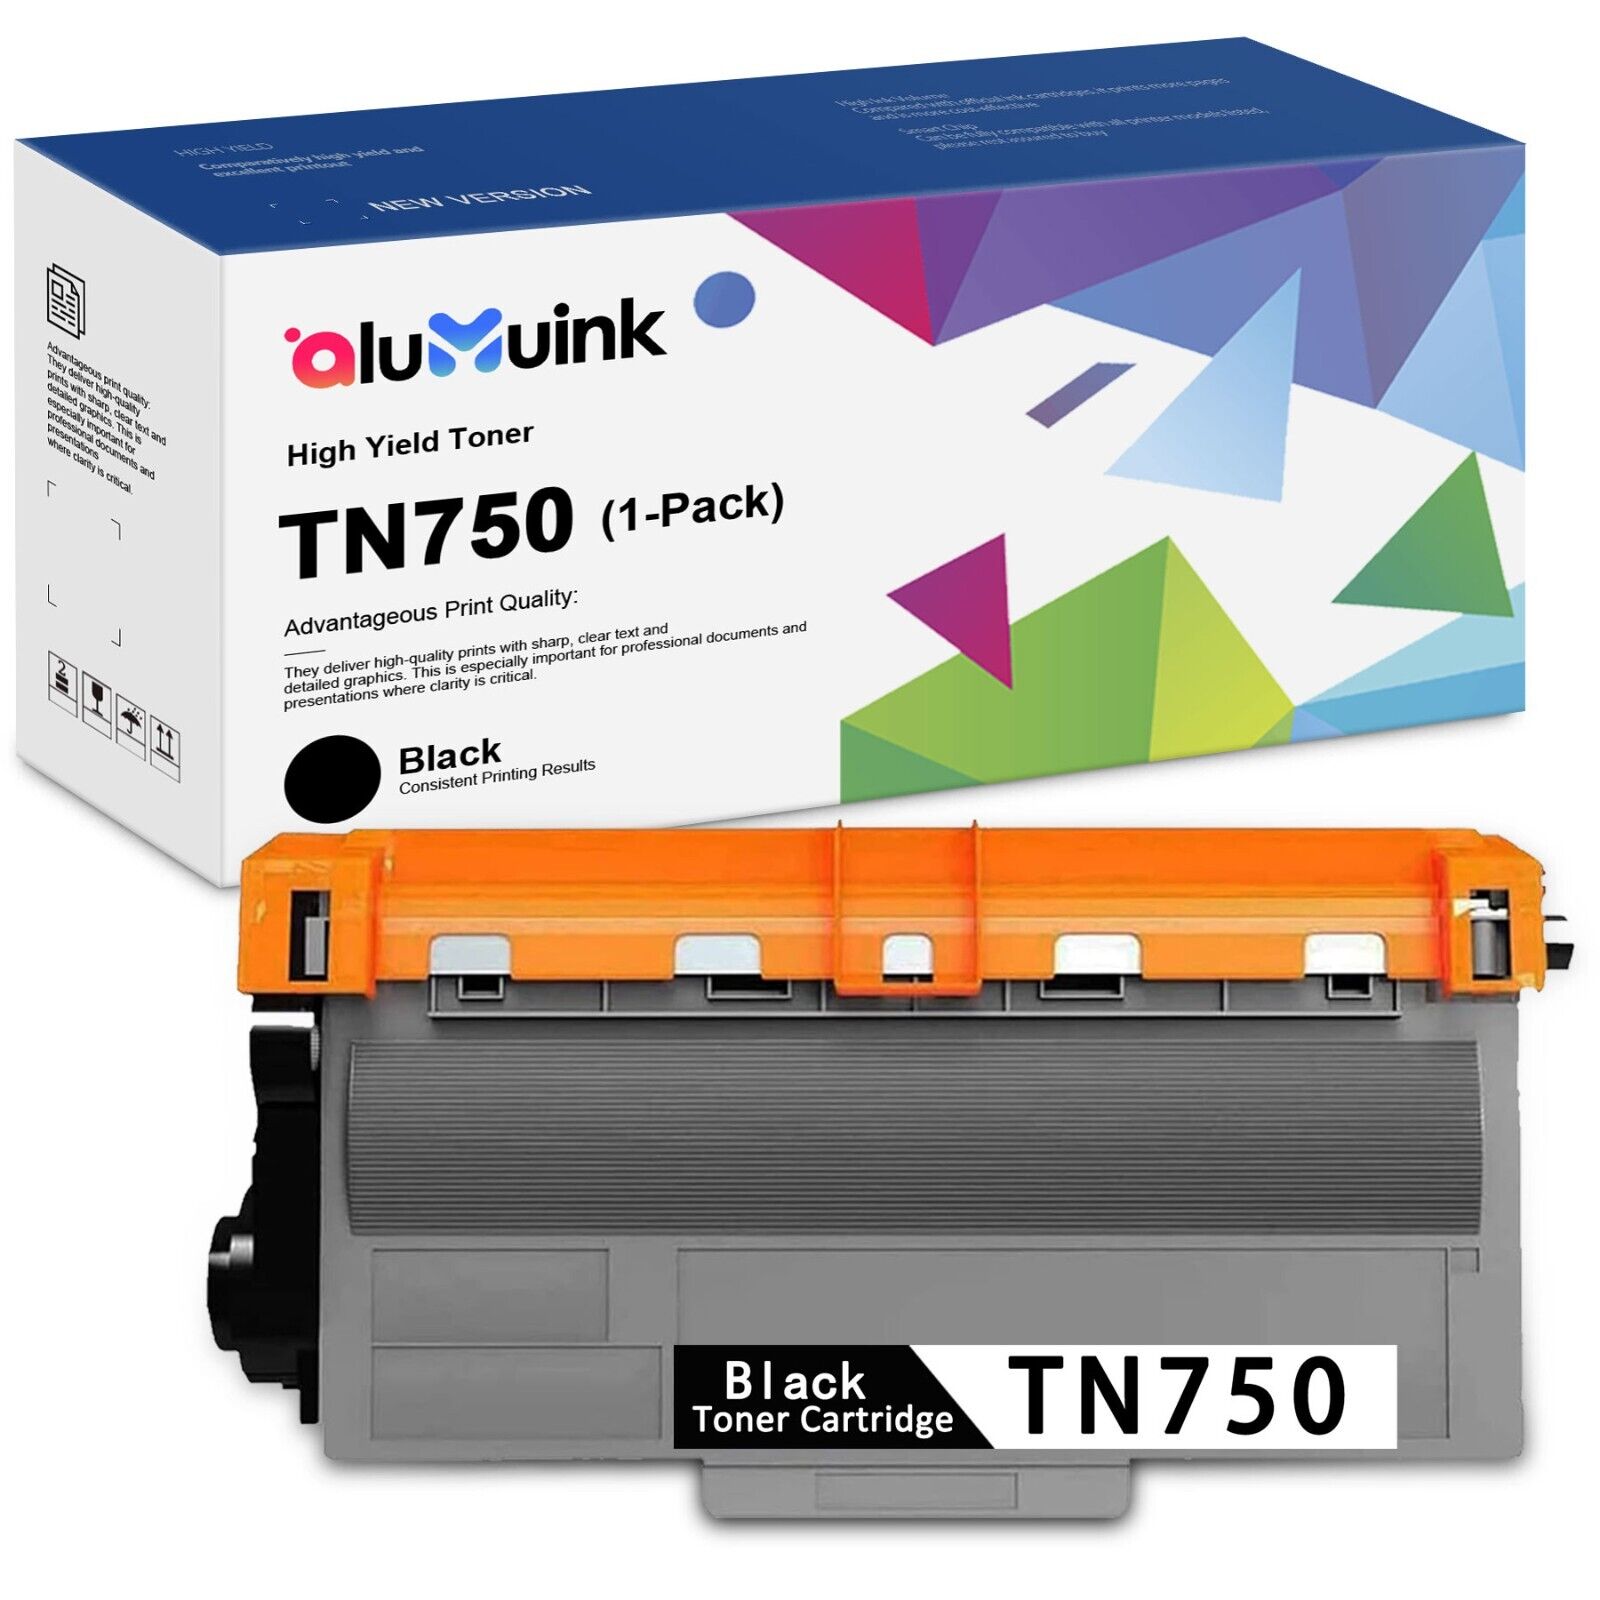 TN750 TN 750 Toner Cartridges Replacement for Brother TN750 DCP-8110DN, 1Black